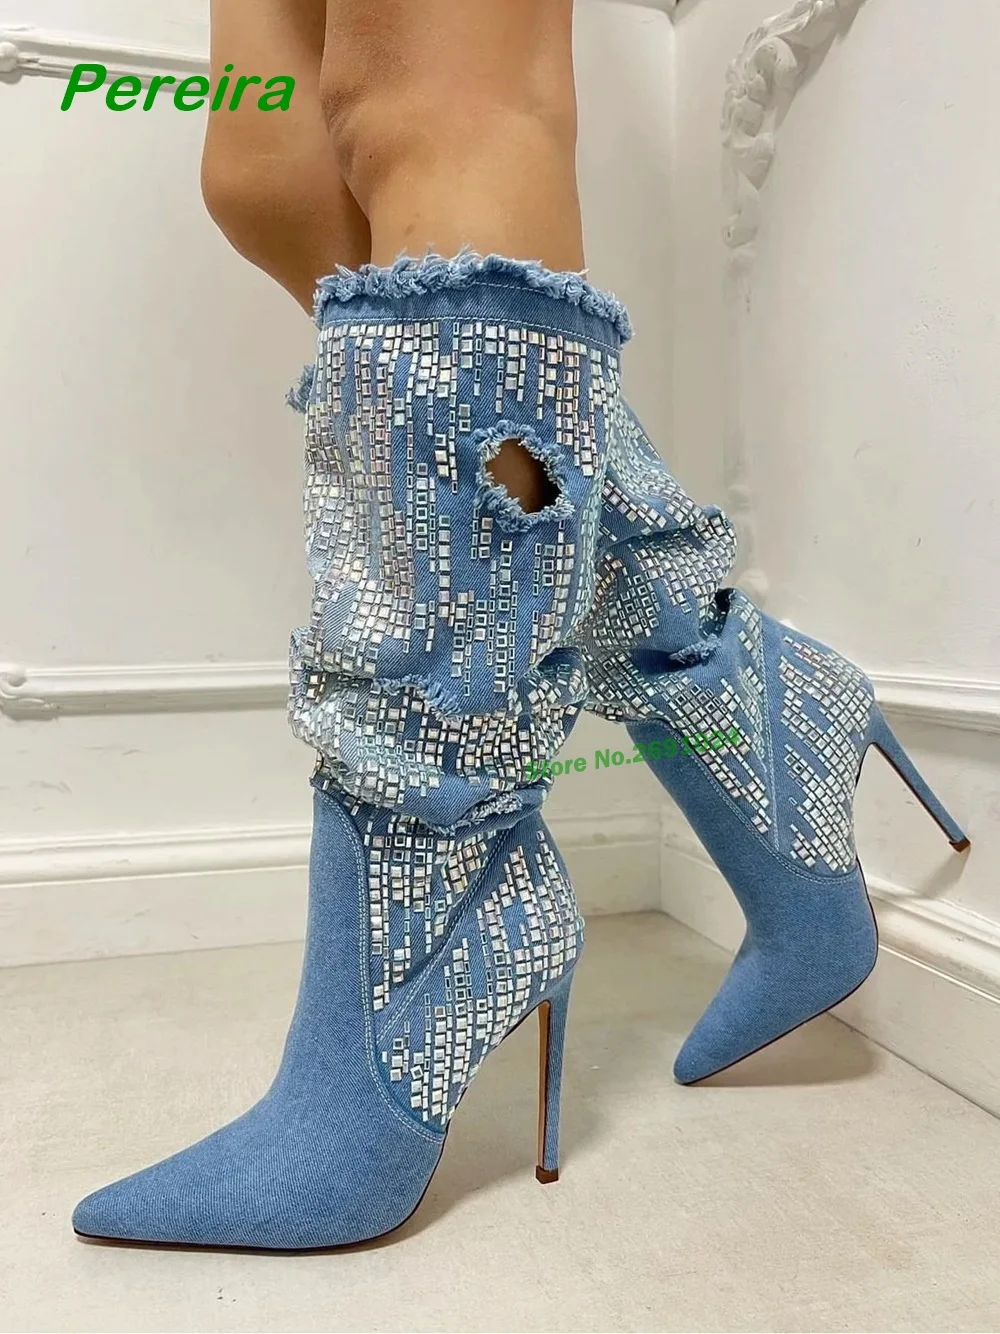 

Denim Hole Rhinestones Boots Pointy Toe Stiletto Heels Slip On Crystal Bling Women's Knee High Boots Runway Party Shoes Sexy